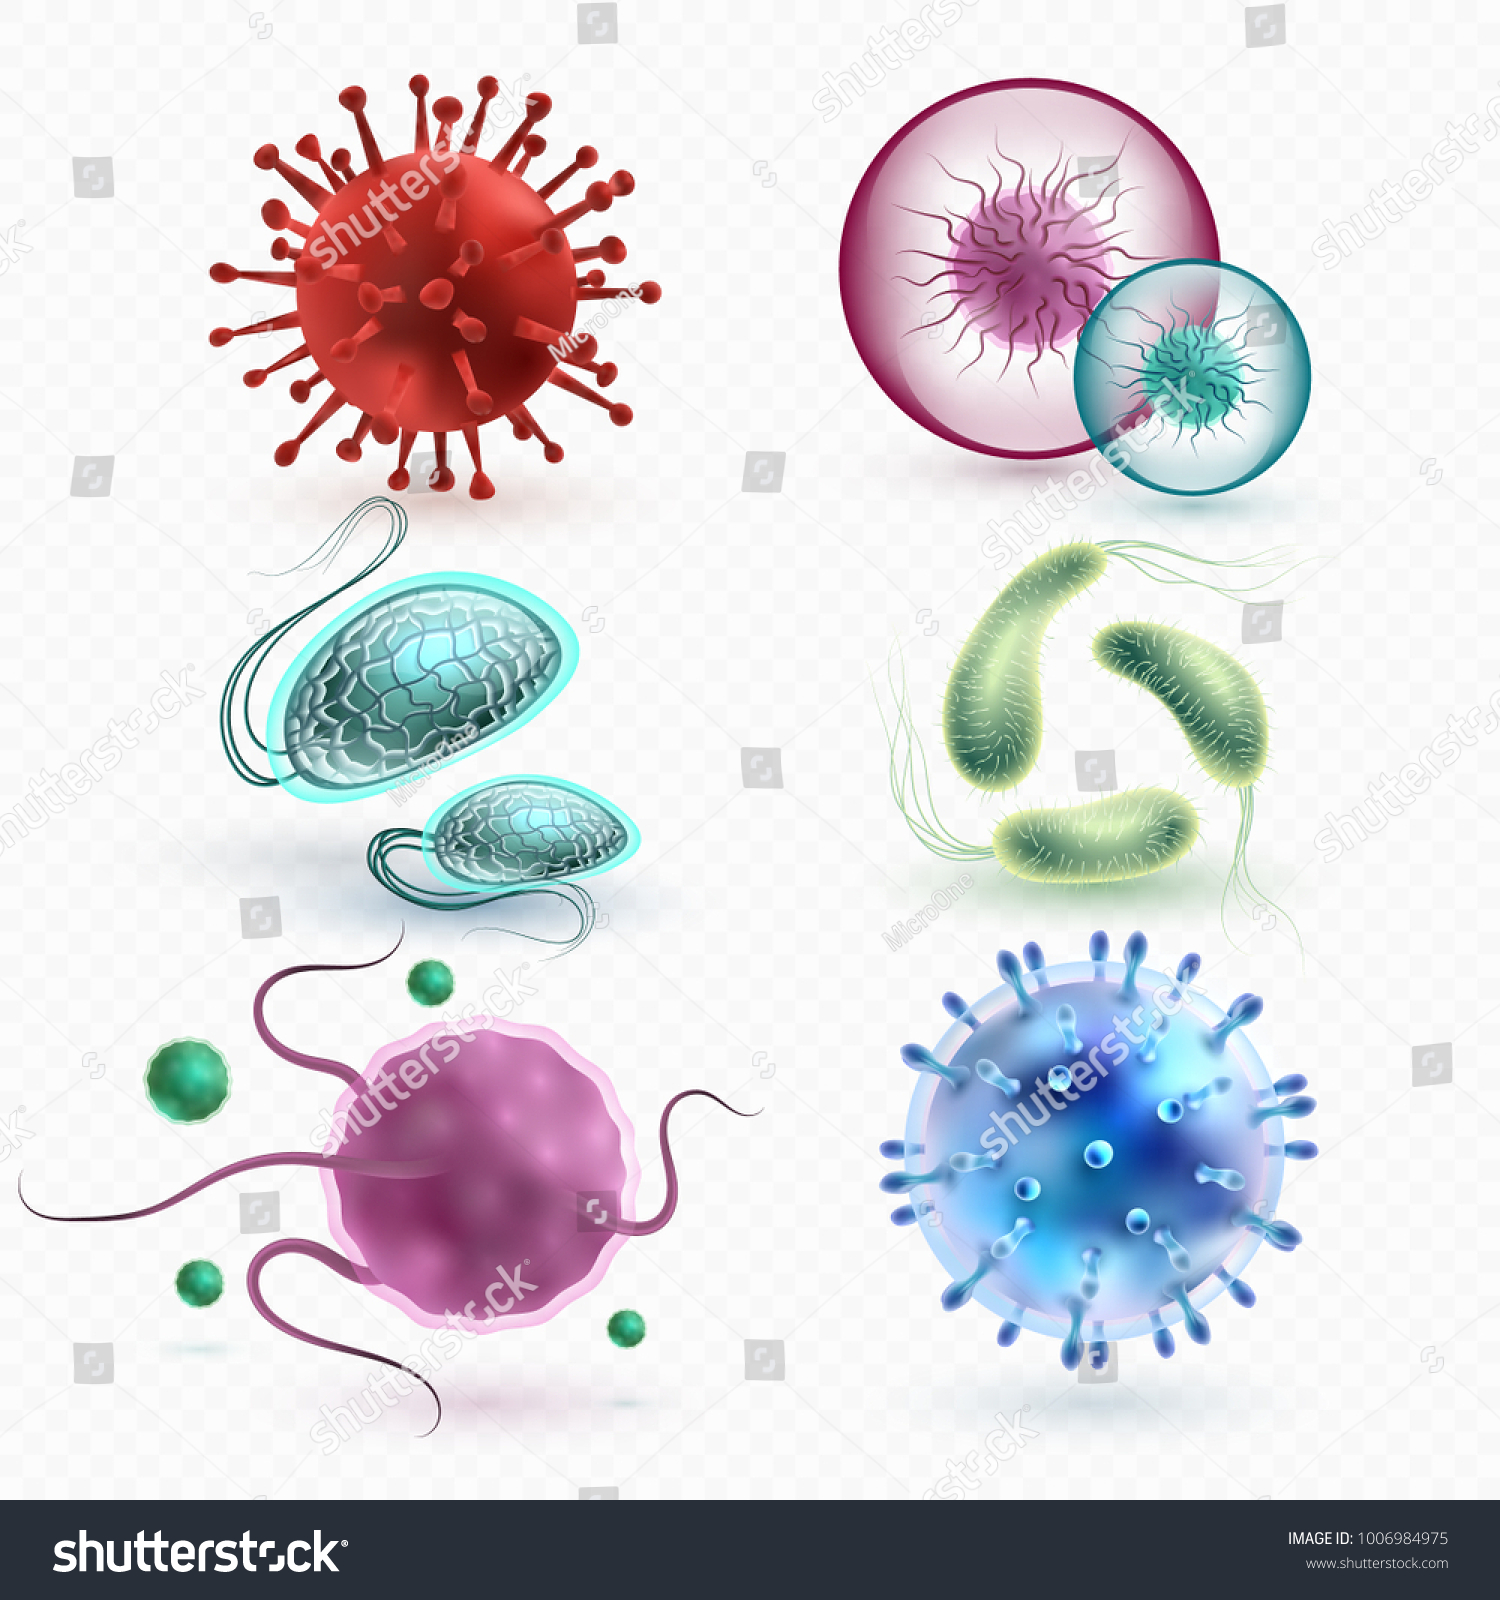 Realistic 3d microscopic viruses and bacteria isolated vector set. Microscopic cell illness, bacterium and microorganism illustration #1006984975